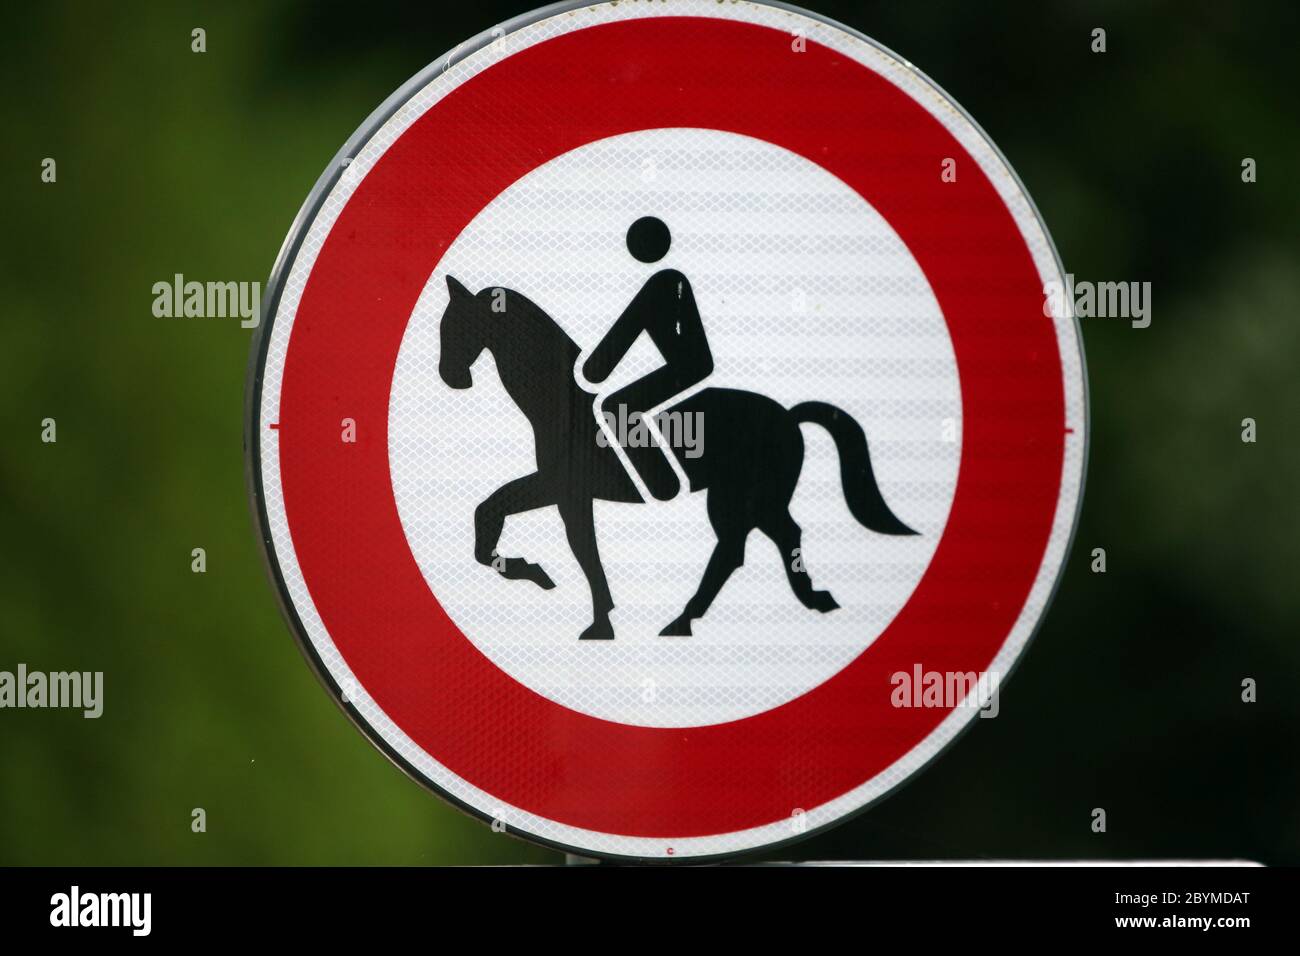 21.07.2017, Rome, , Italy - Notice sign: no riders allowed. 00S170721D031CAROEX.JPG [MODEL RELEASE: NOT APPLICABLE, PROPERTY RELEASE: NO (c) caro imag Stock Photo